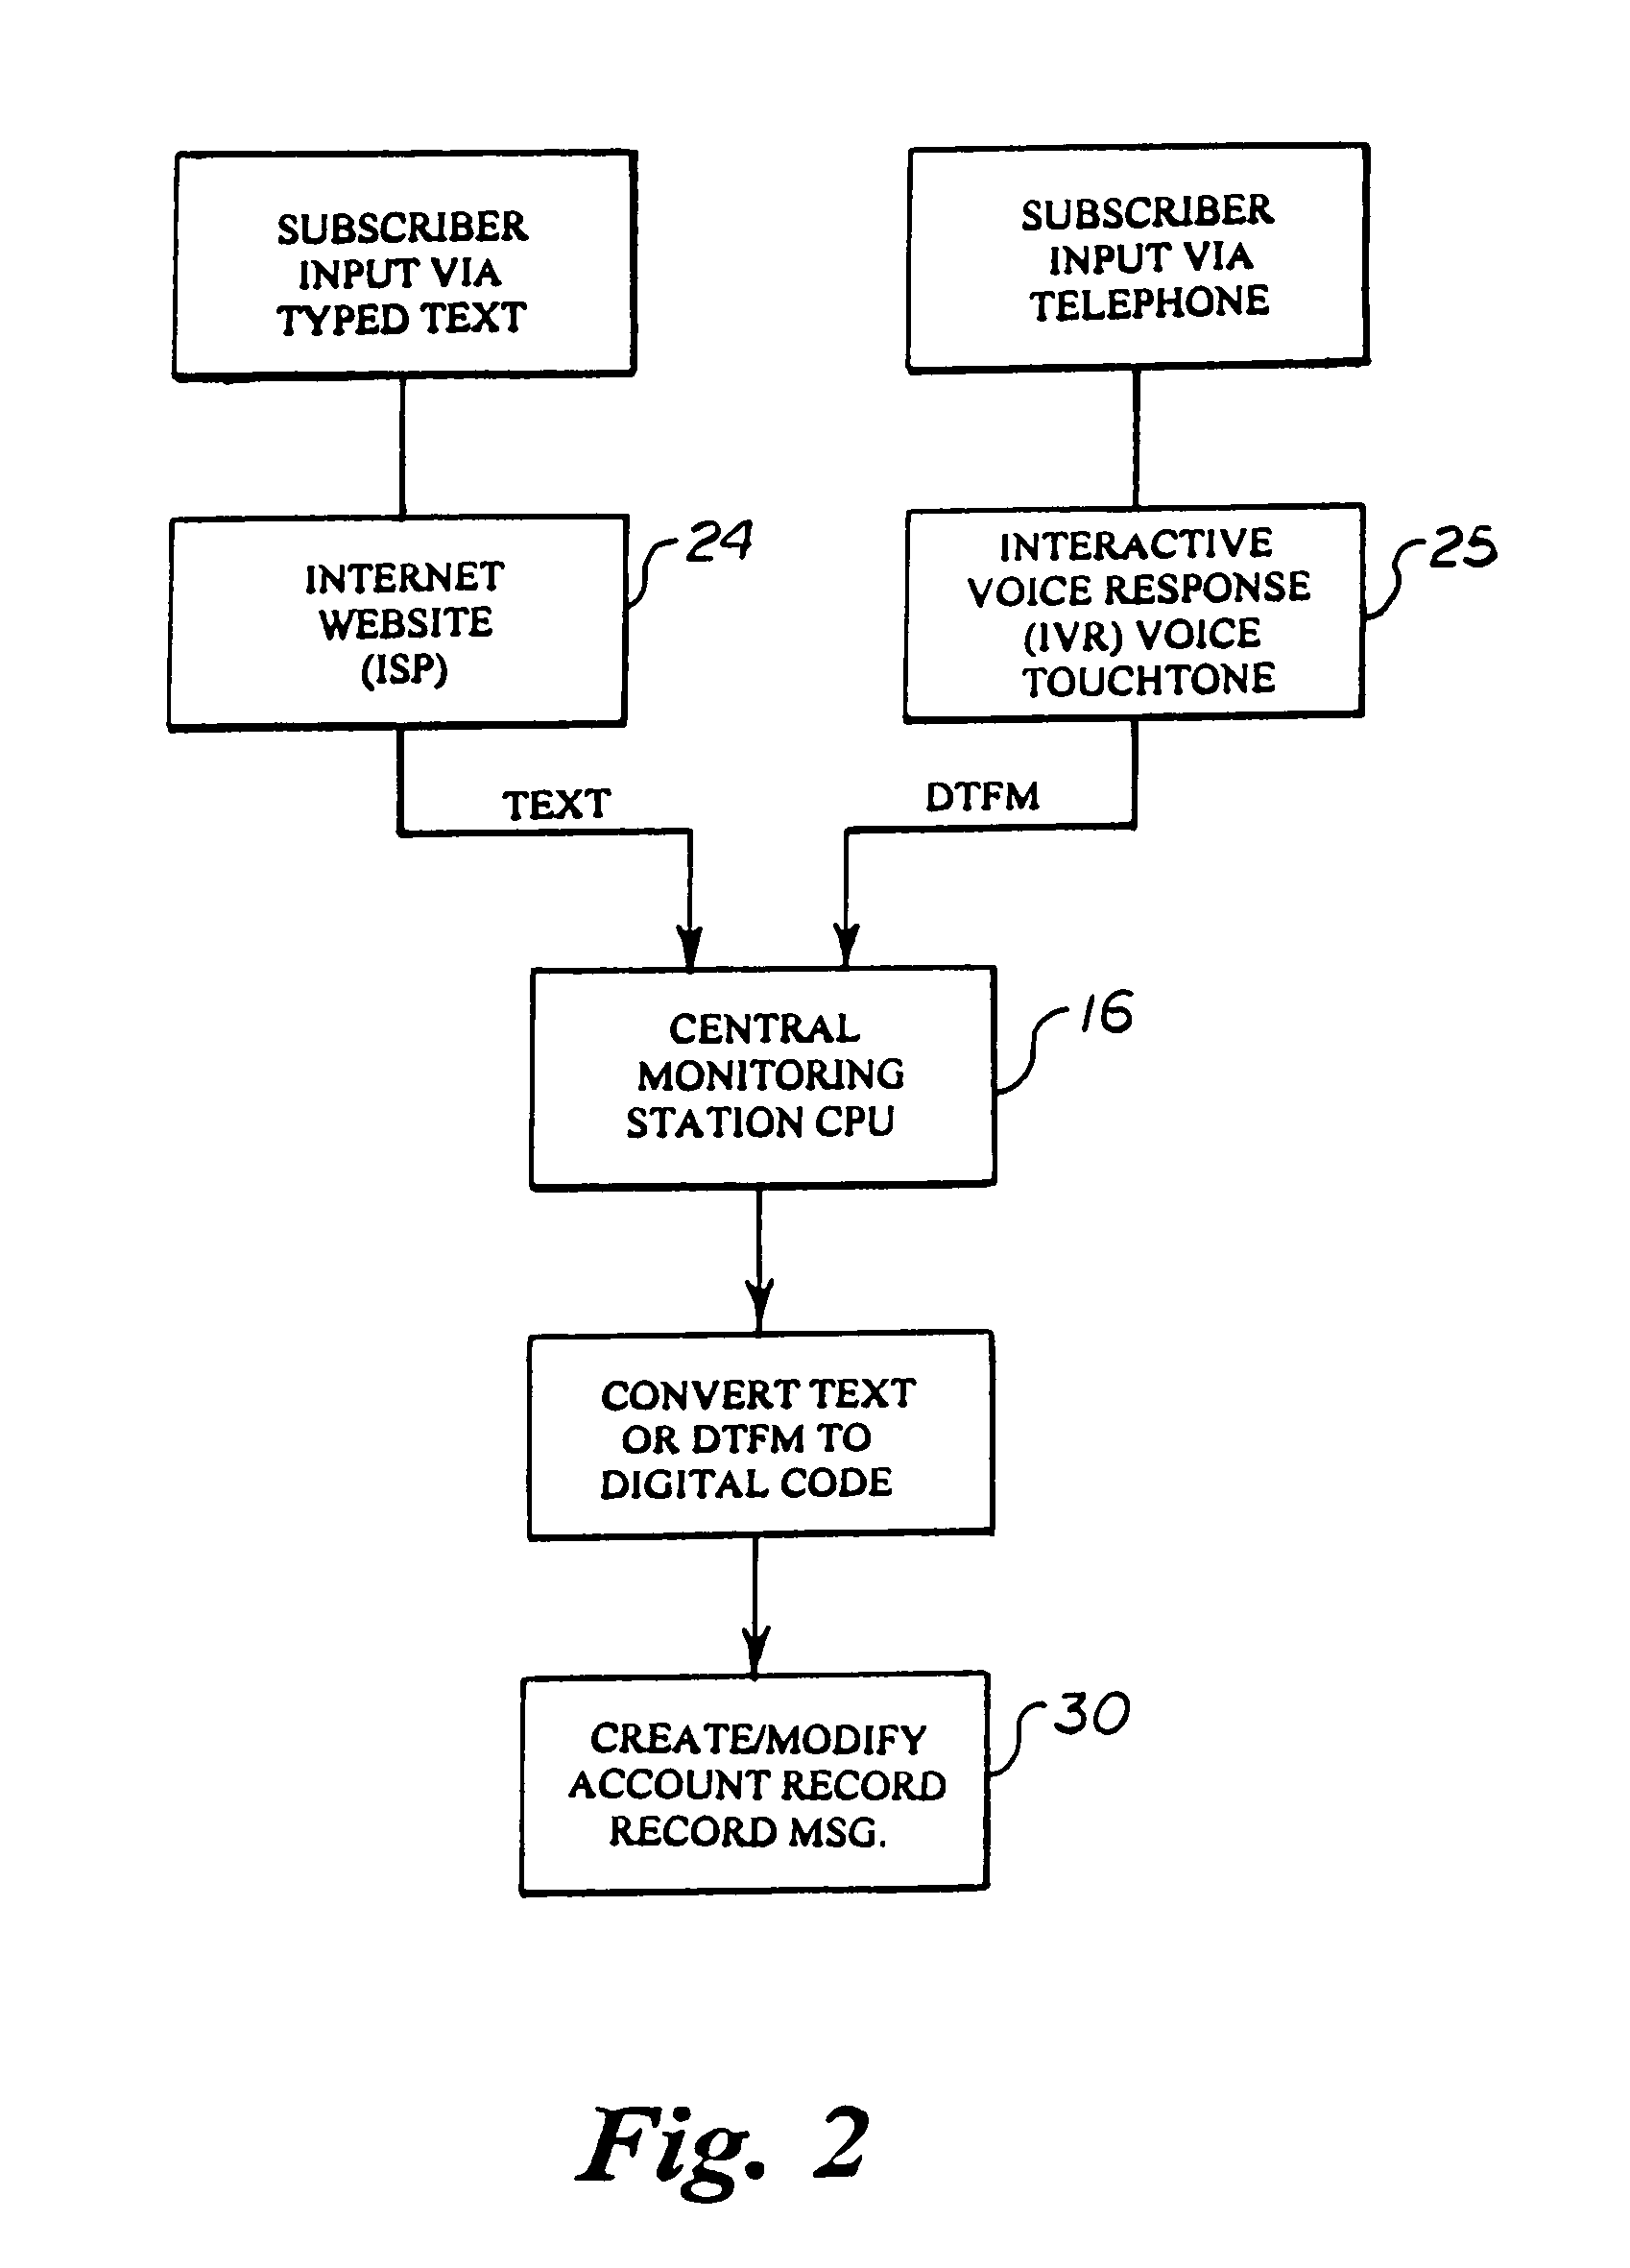 Automated parallel and redundant subscriber contact and event notification system